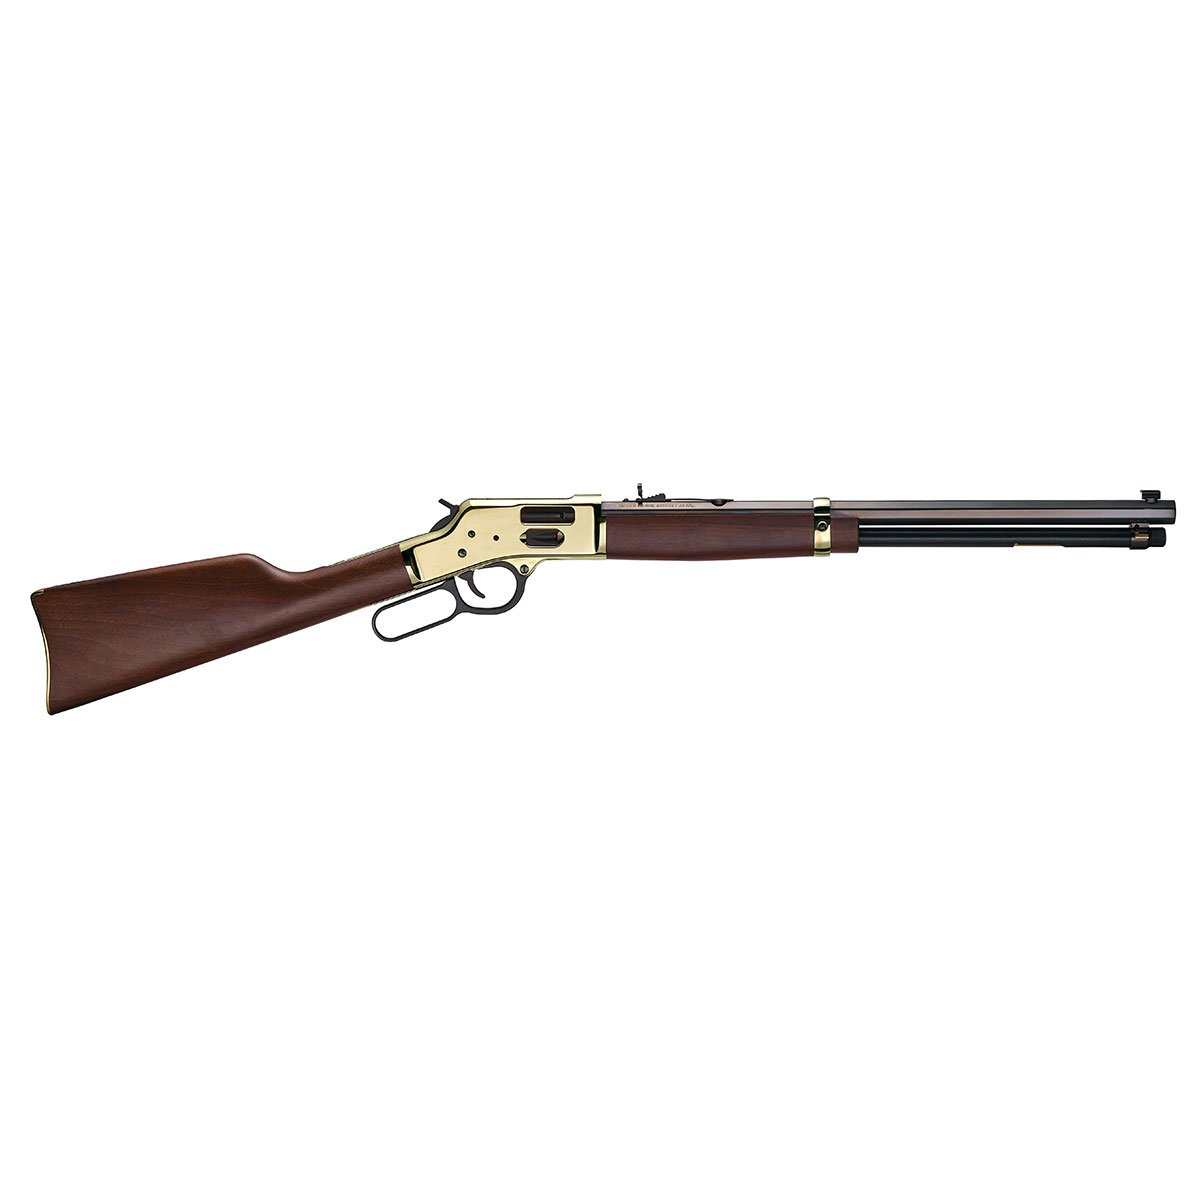 HENRY REPEATING ARMS - BIG BOY BRASS 44 MAGNUM/44 SPECIAL LEVER ACTION RIFLE